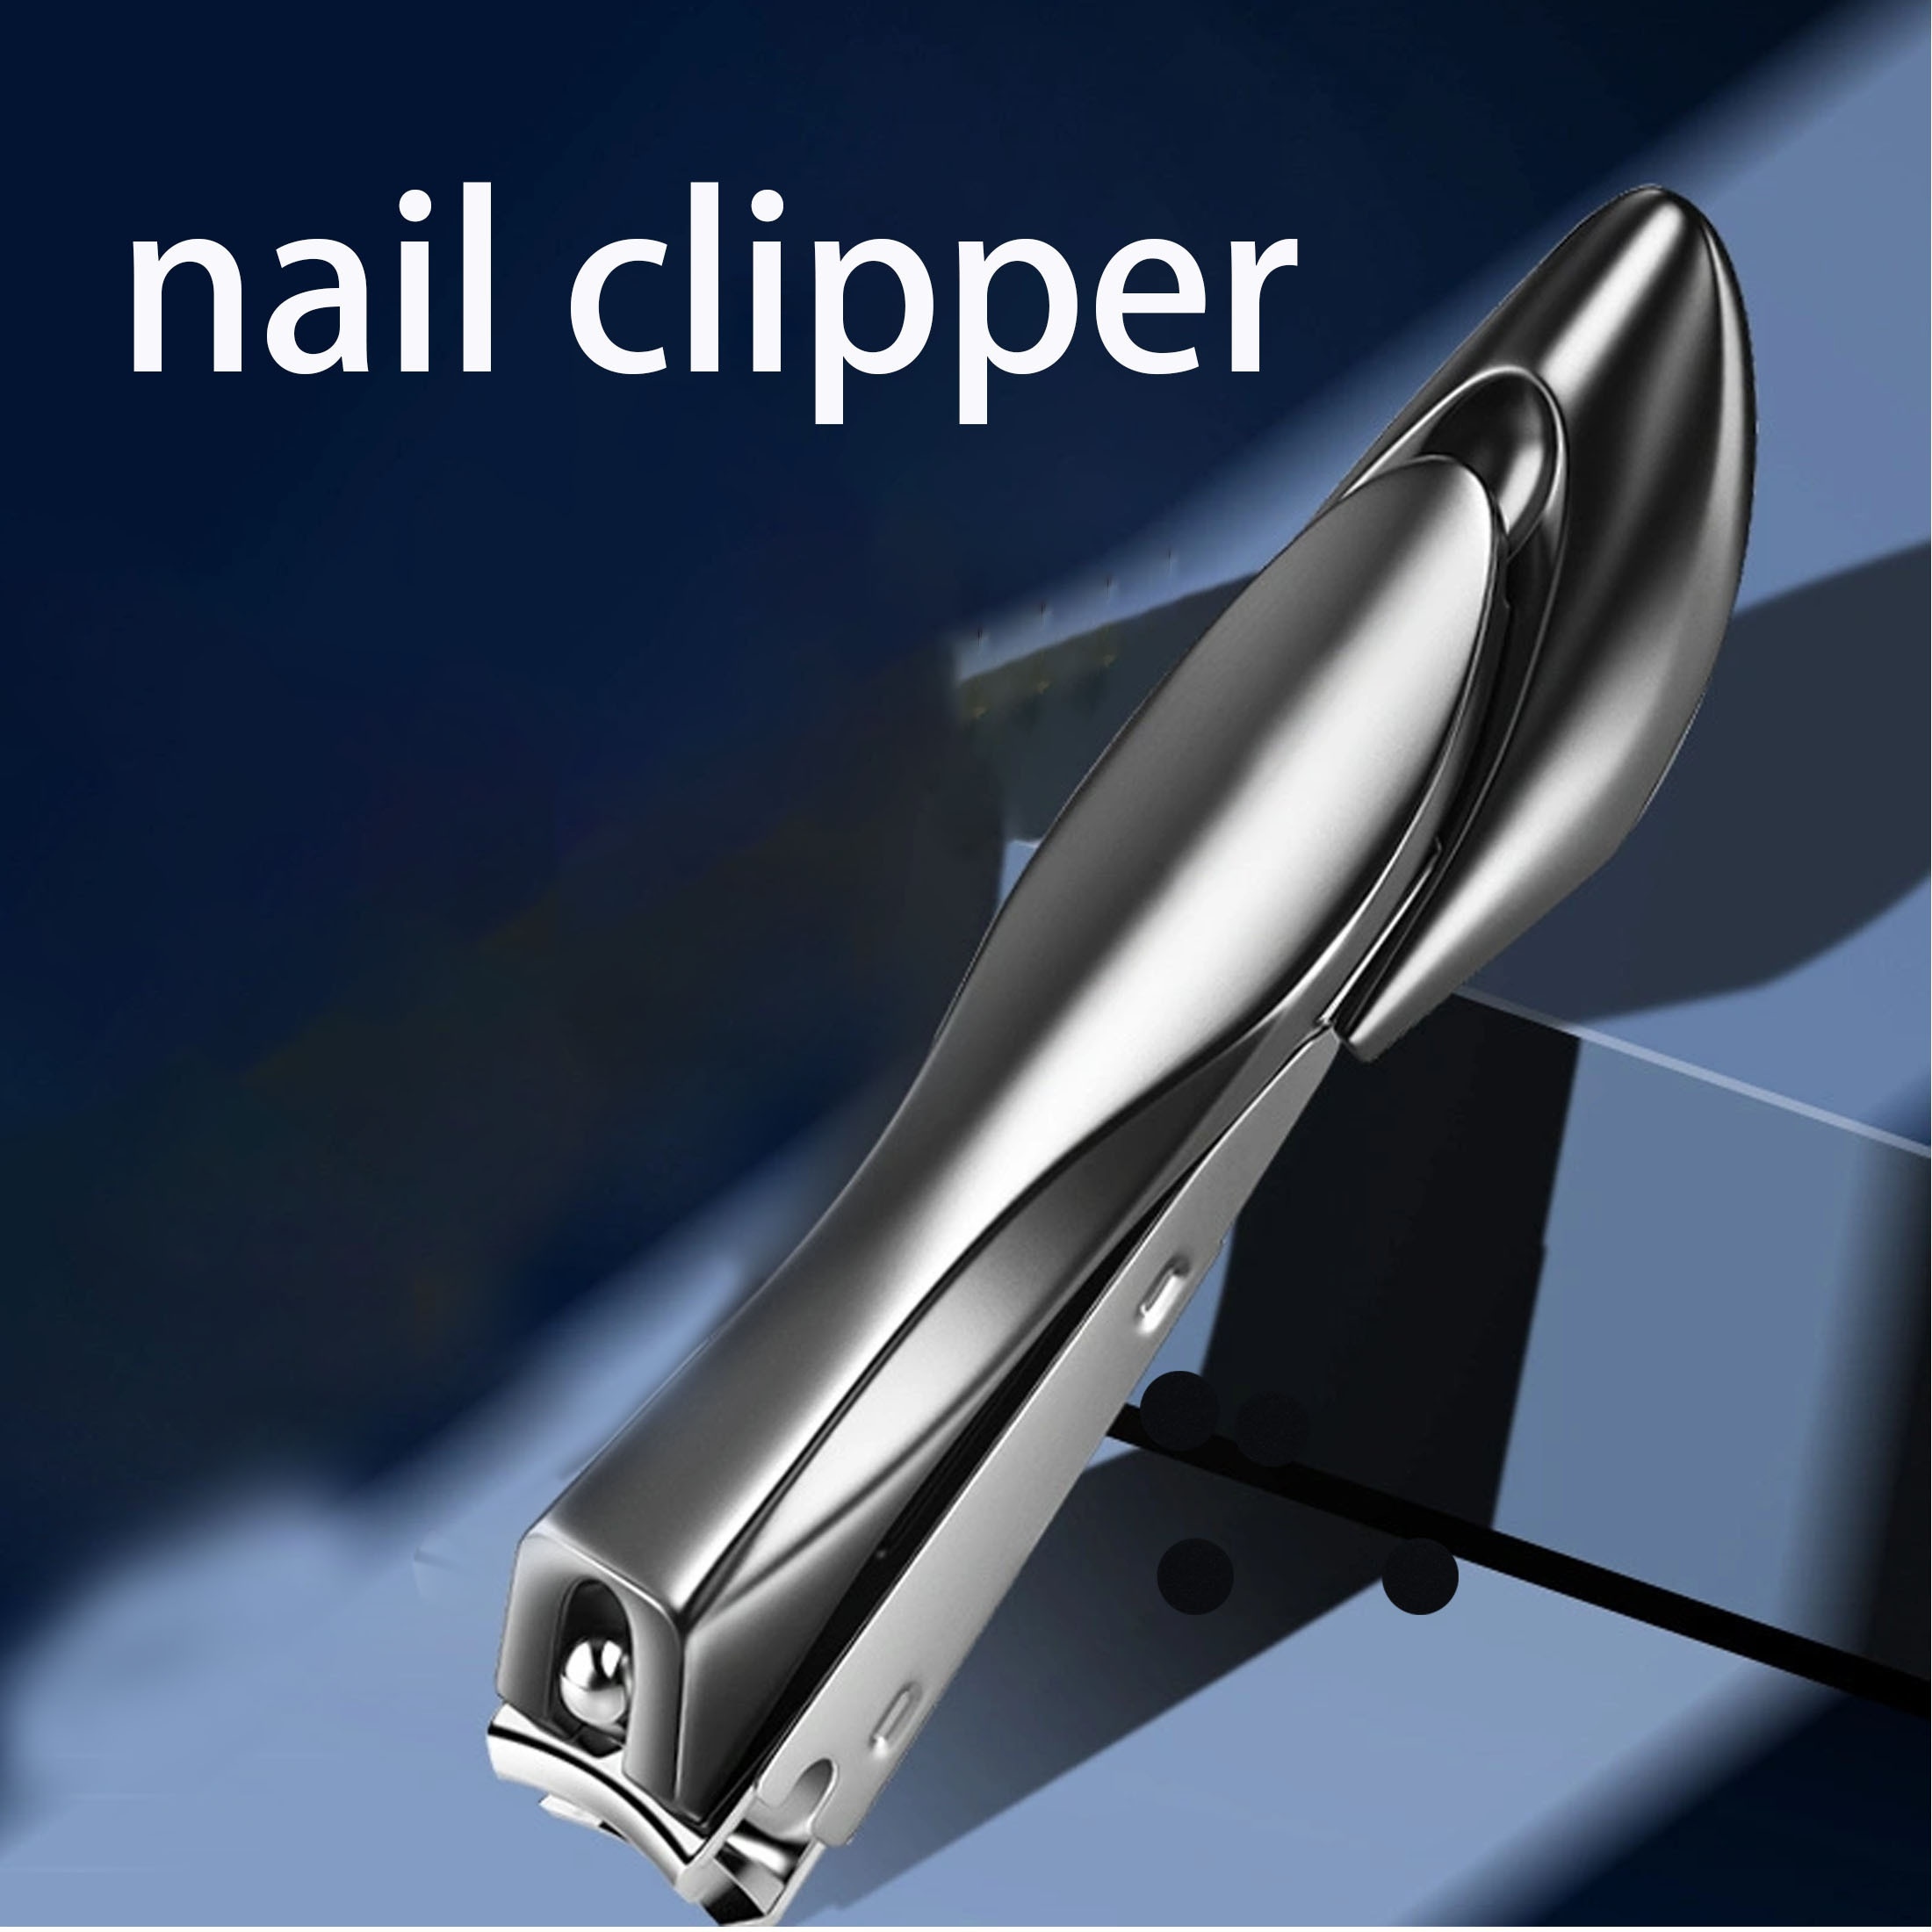 Splash Proof Nail Clipper with Built-in Nail Debris Catcher Stainless Steel  with Built-in Nail Debris Catcher Stainless Steel Splash Proof Fingernail  Toenail Nail Clipper Gray-No Nail File 